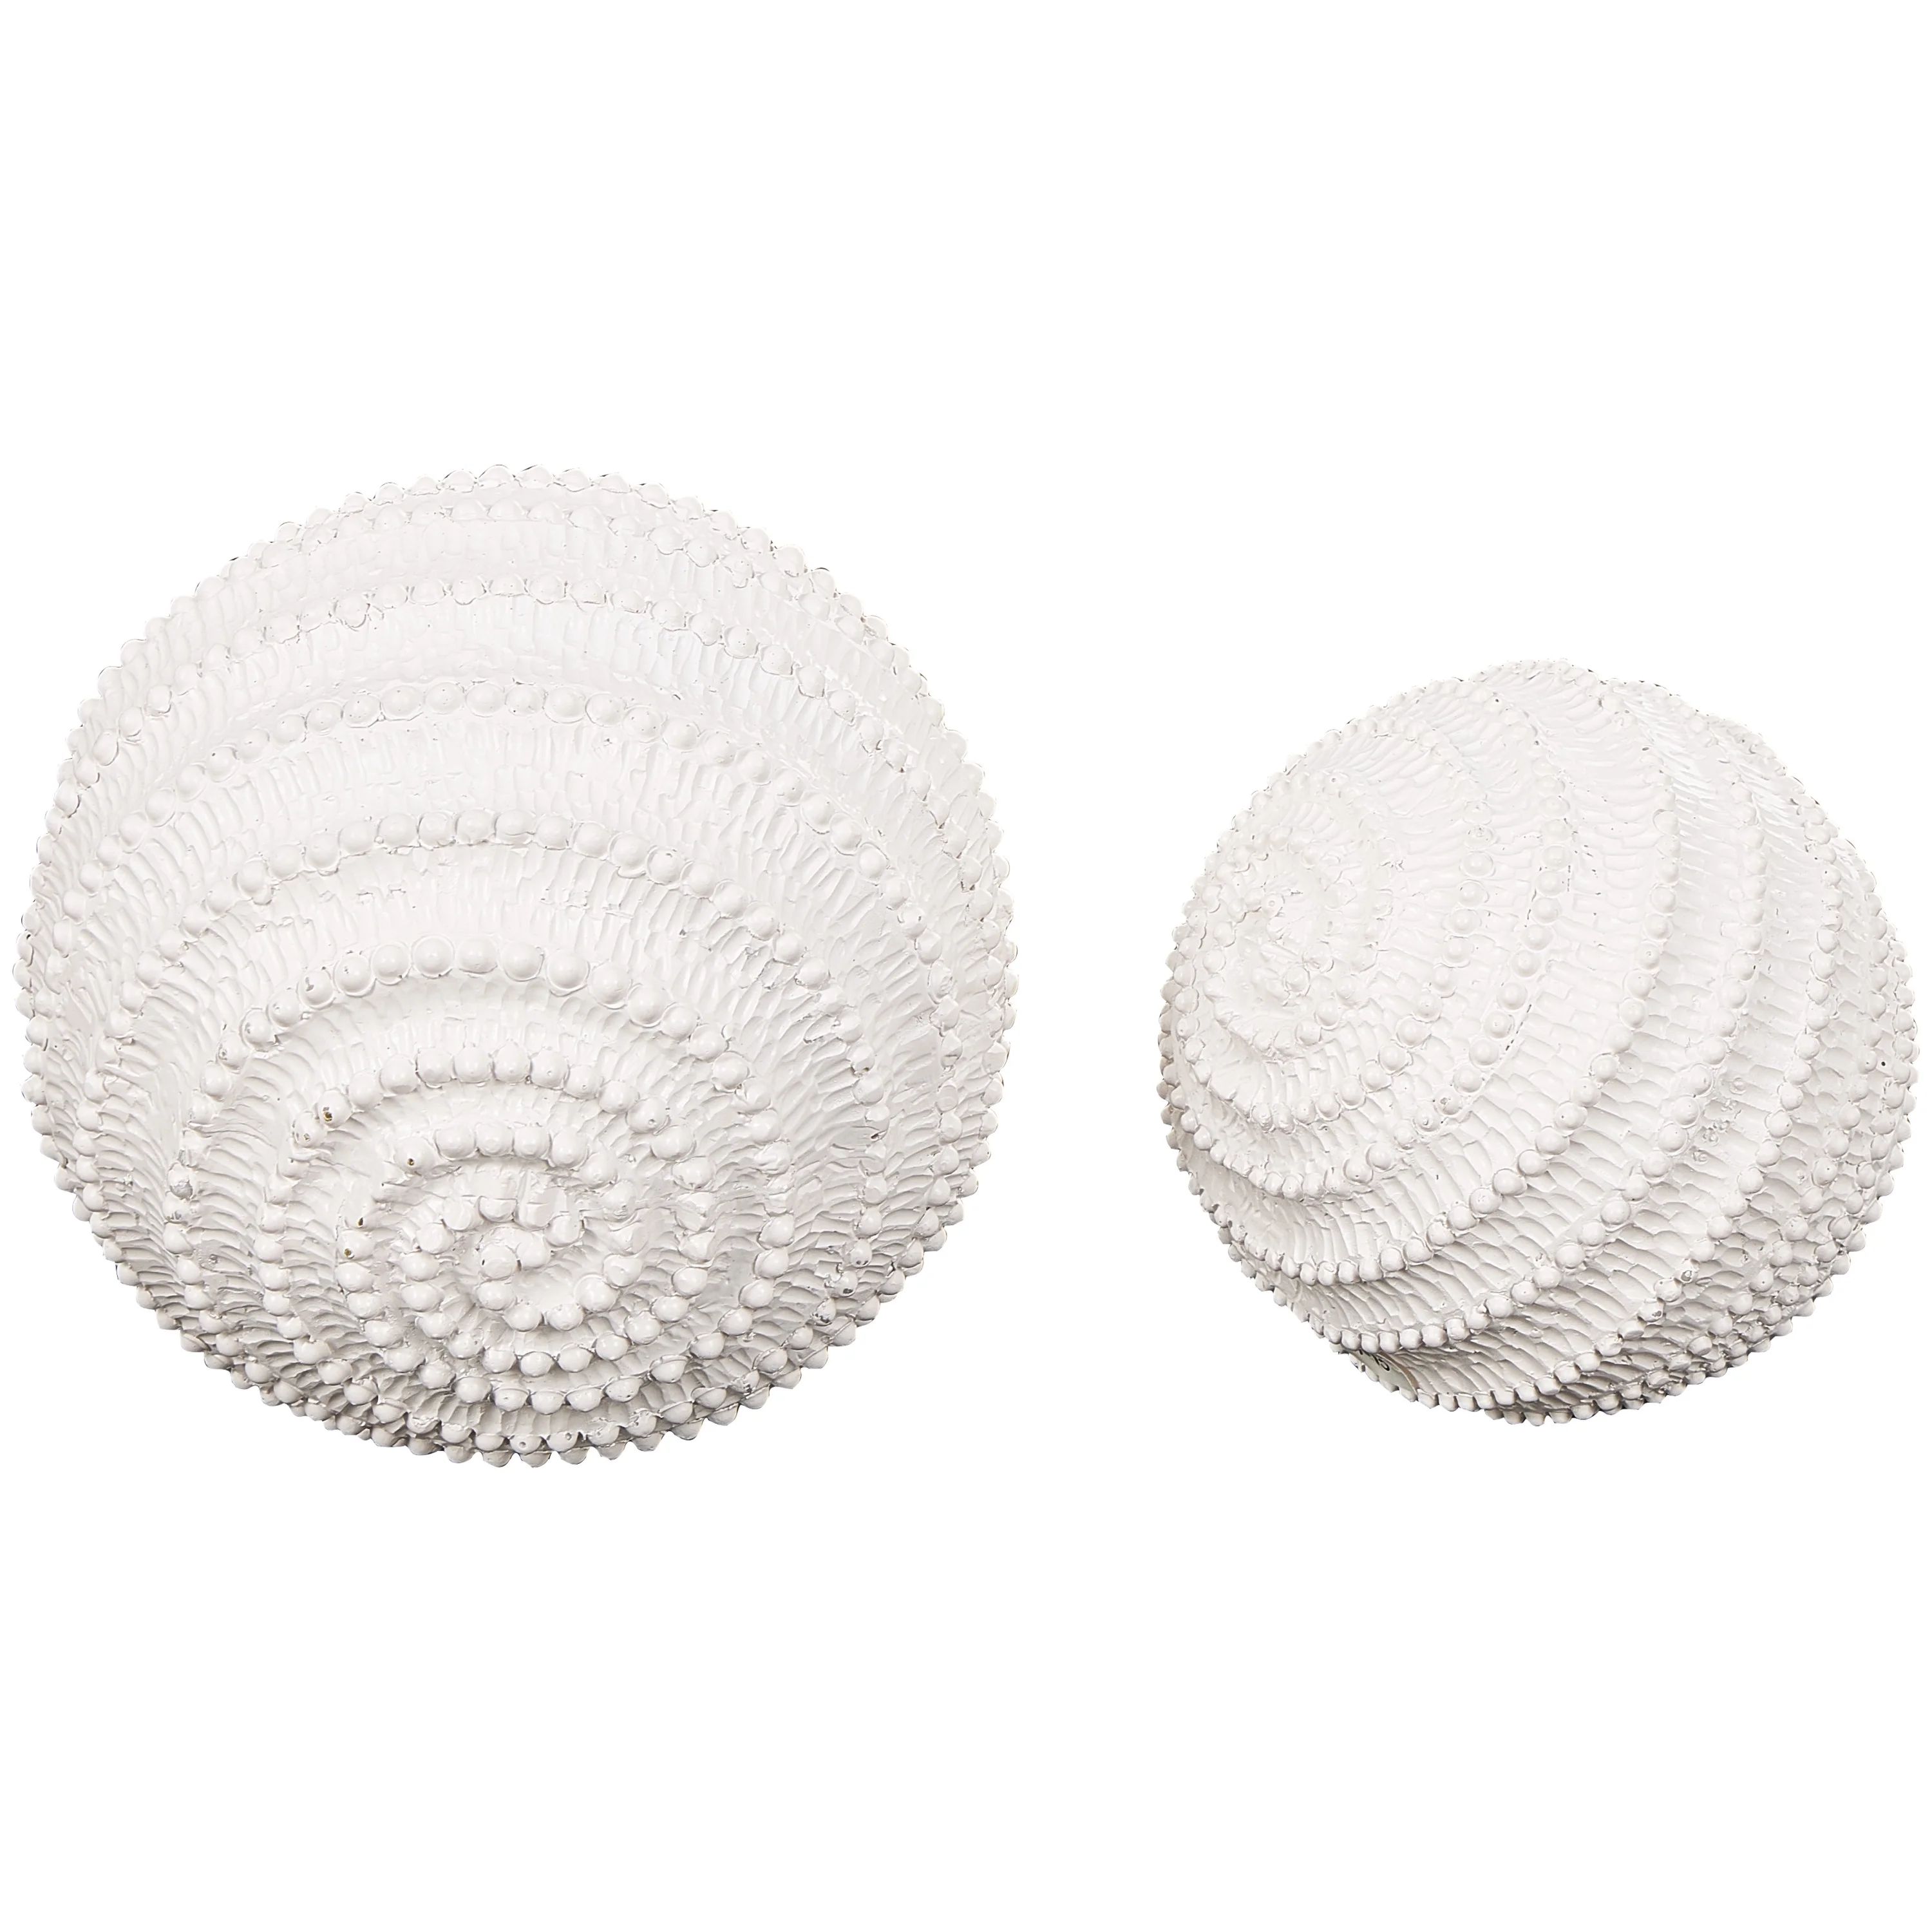 6", 5"H Cream Resin Textured Coral Sculpture with Dimensional Ball Details, by DecMode (2 Count) ... | Walmart (US)